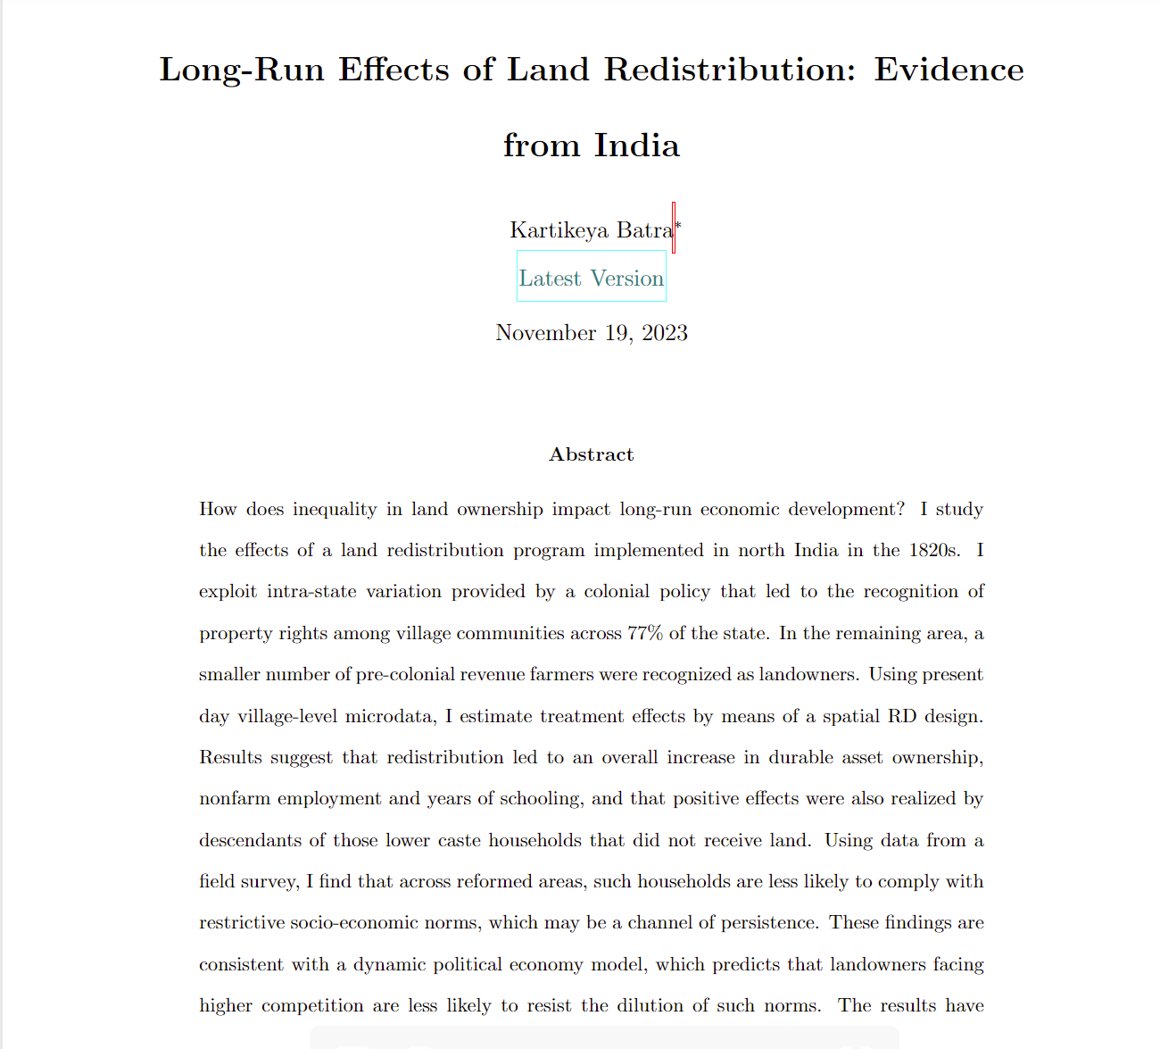 📢 📢 In Indian districts where land was REDISTRIBUTED in the 1820s, I find BETTER modern-day socio-economic outcomes among LOWER CASTES, possibly due to a weakened CASTE system. Link to paper below. Thoughts welcome. #EconTwitter #EconJobMarket #JMP 
tinyurl.com/bded7yvn